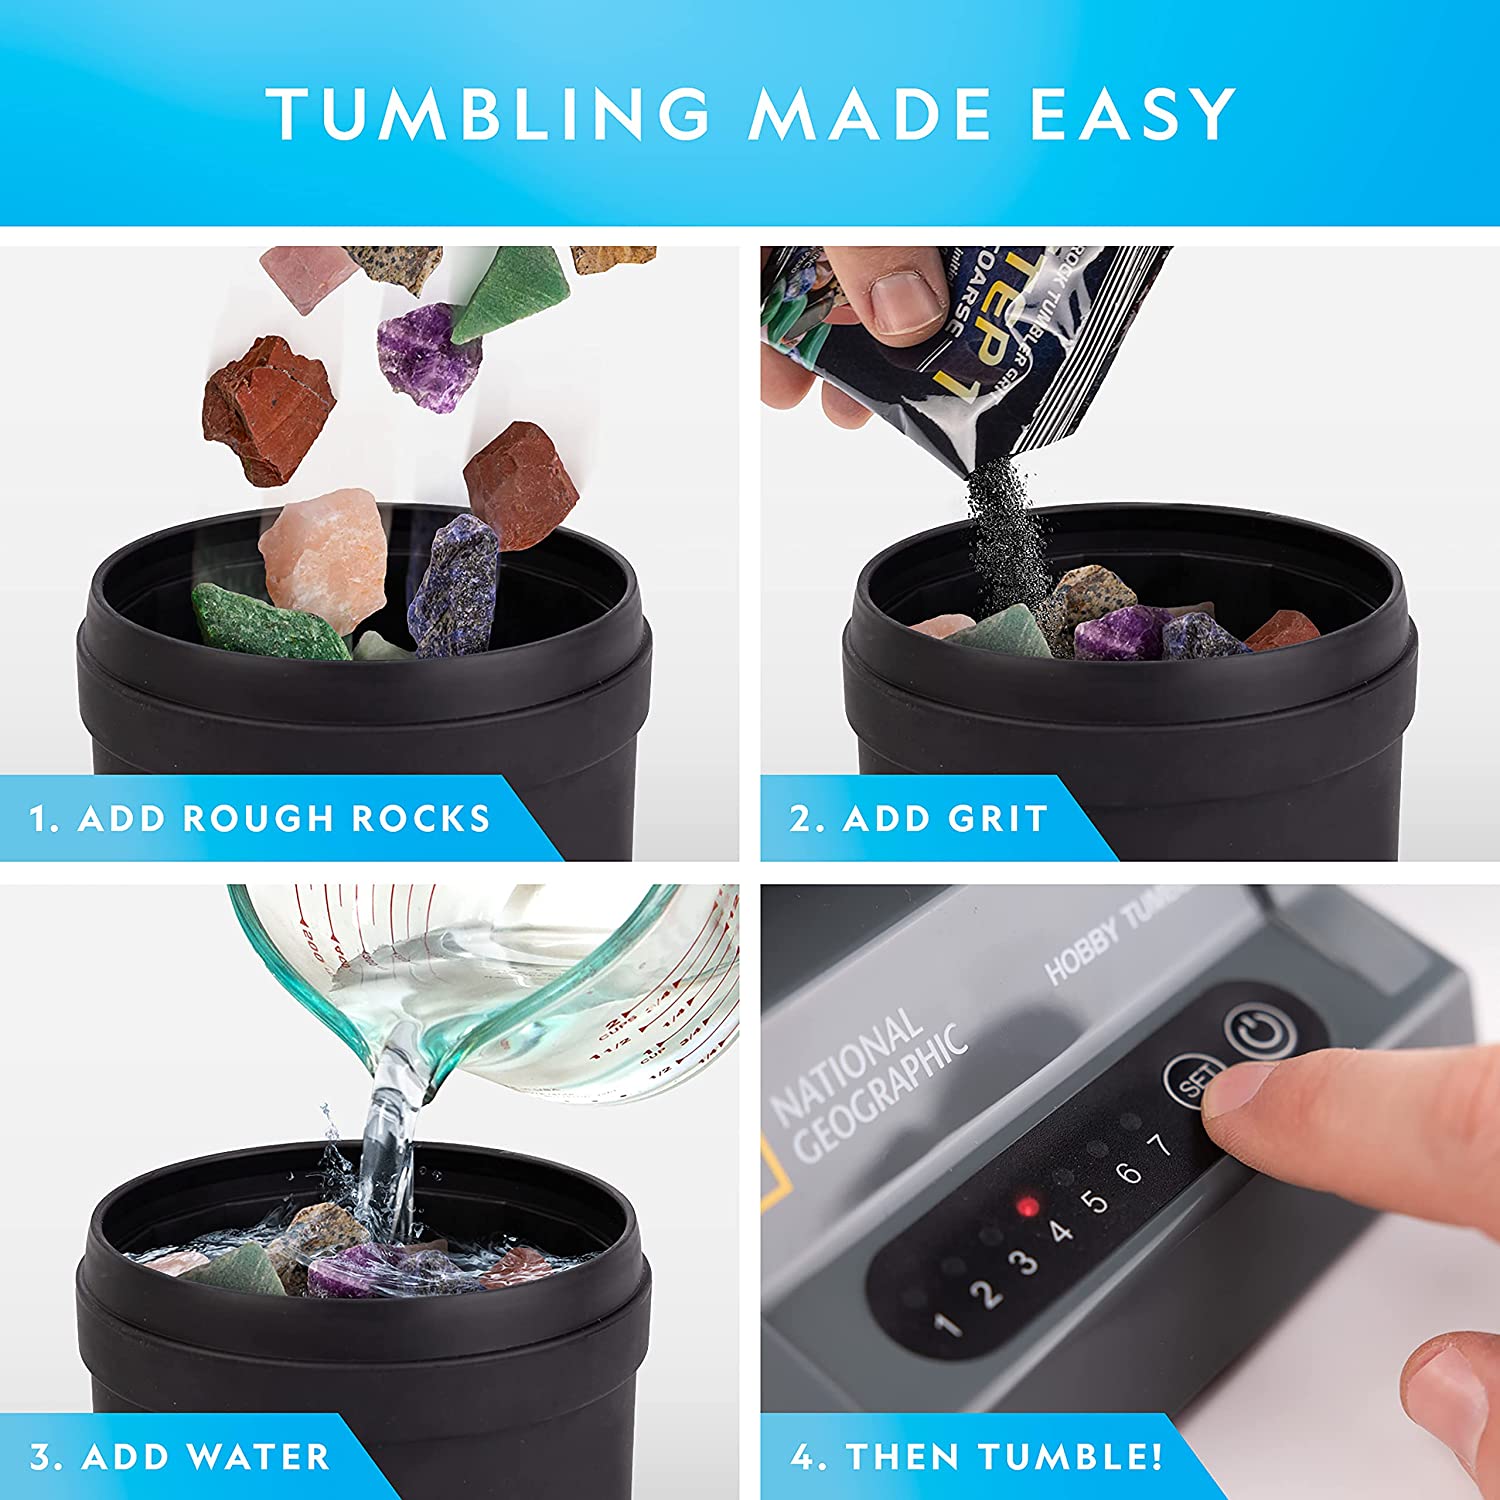 A 4-step instruction guide on how to use the National Geographic rock tumbling kit. The text reads, 'Tumbling made easy. Step 1, add rough rocks. Step 2, add grit. Step 3, add water. Step 4, then tumble.'